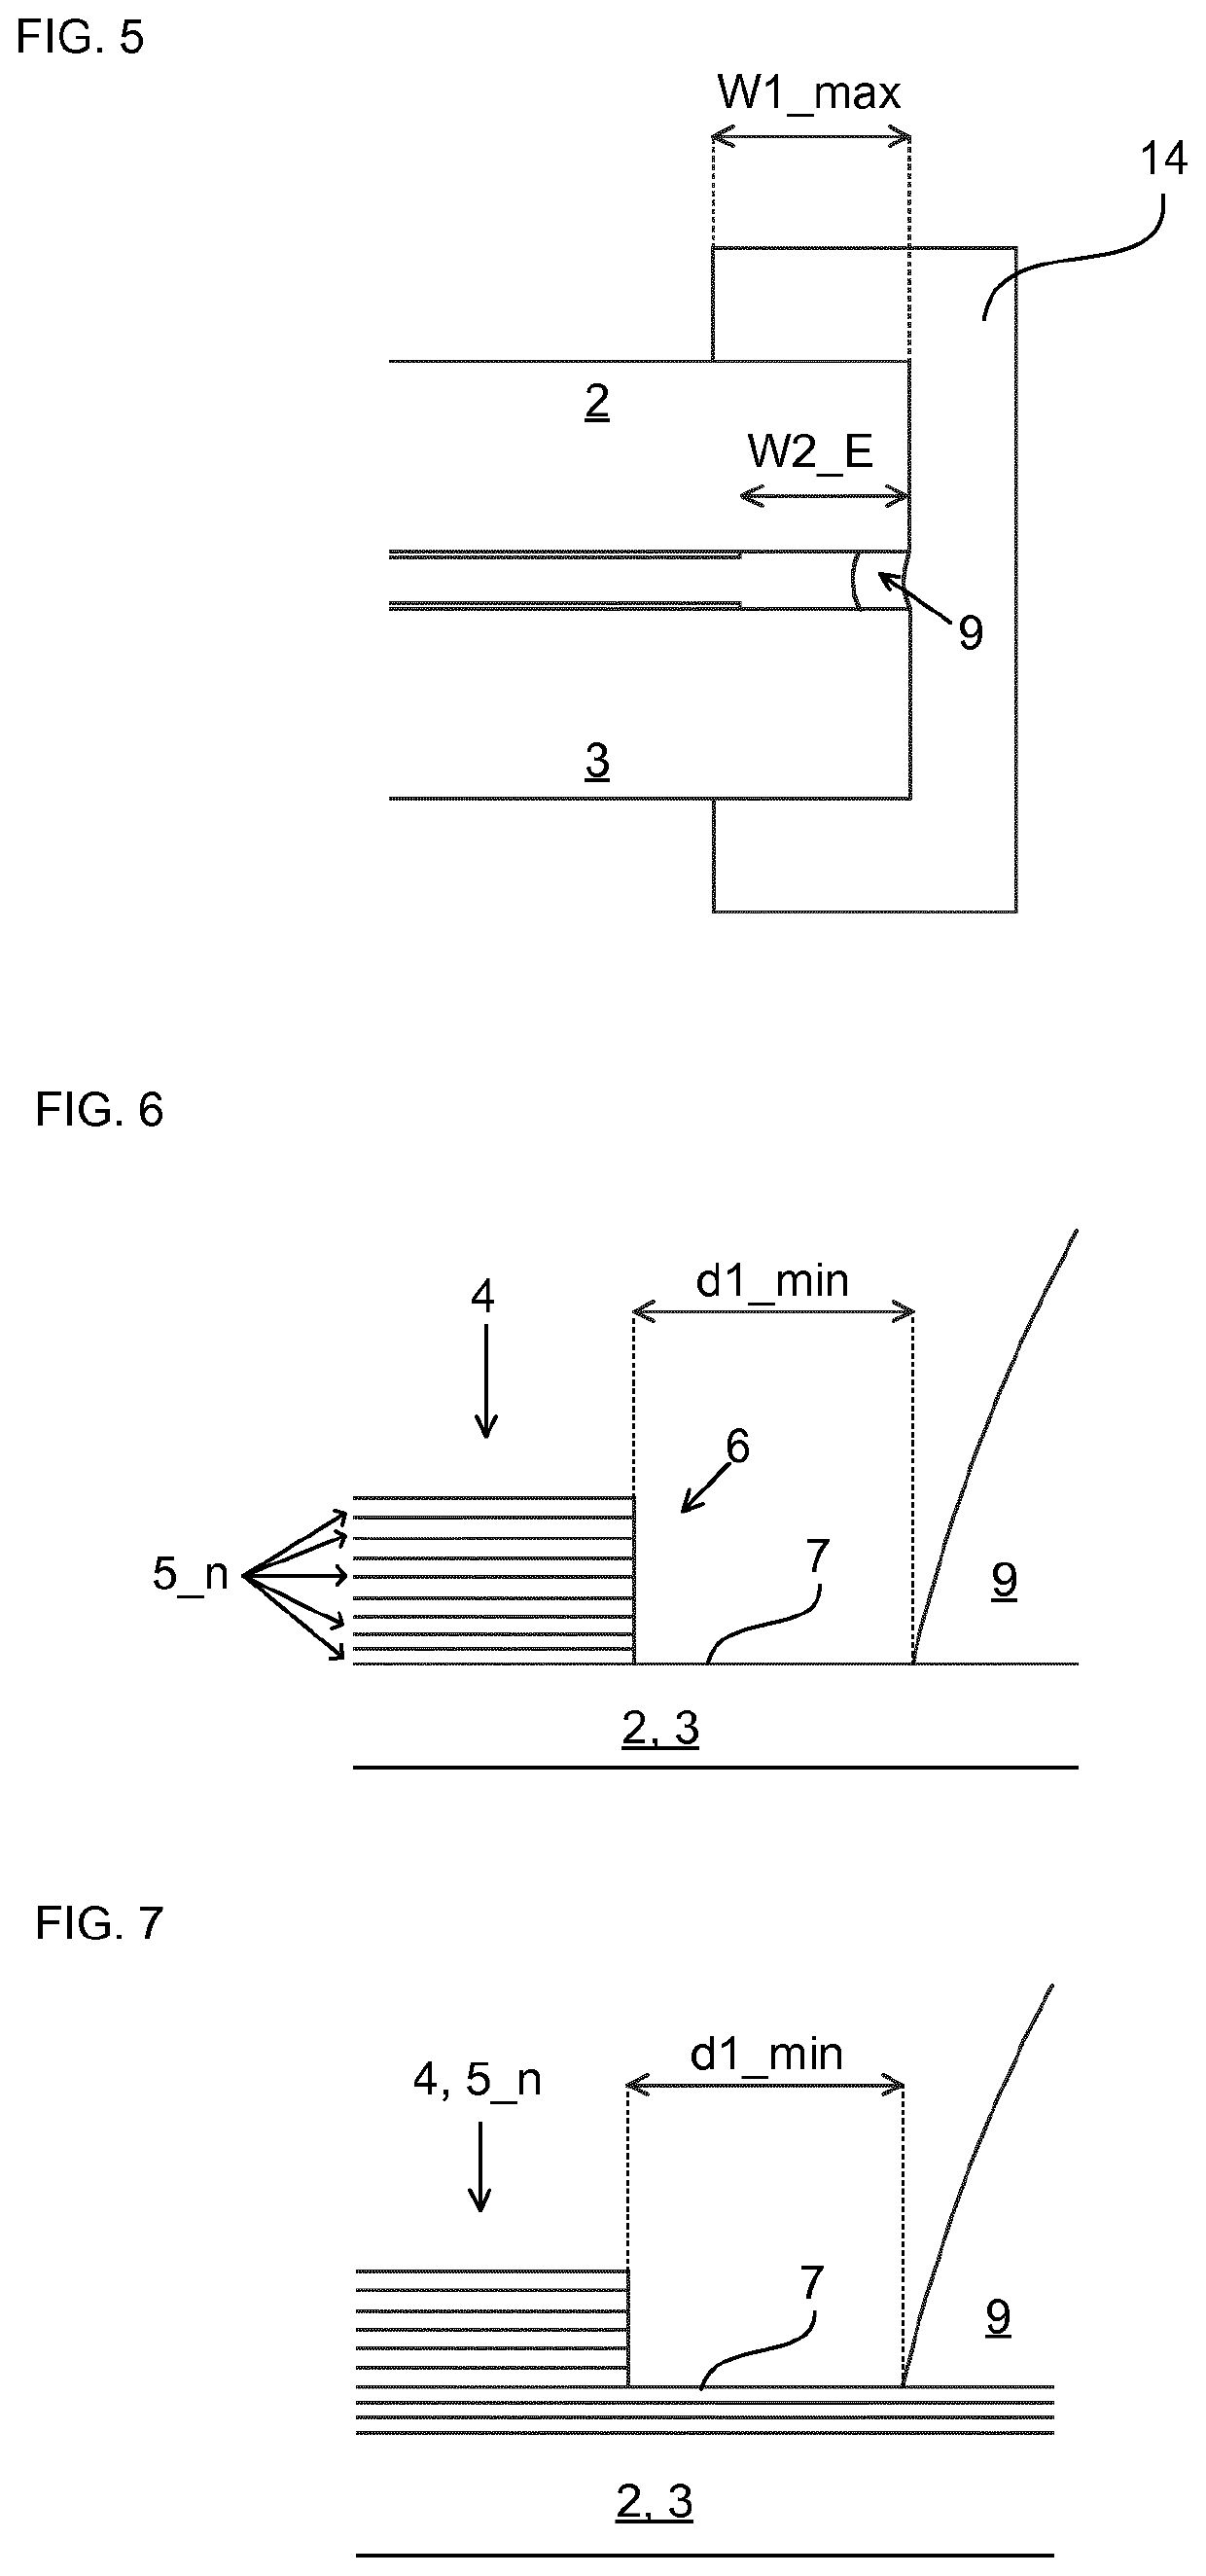 Vacuum insulated glazing unit having a separation distance between a side seal and a low emissivity coating, and associated methods of manufacturing same